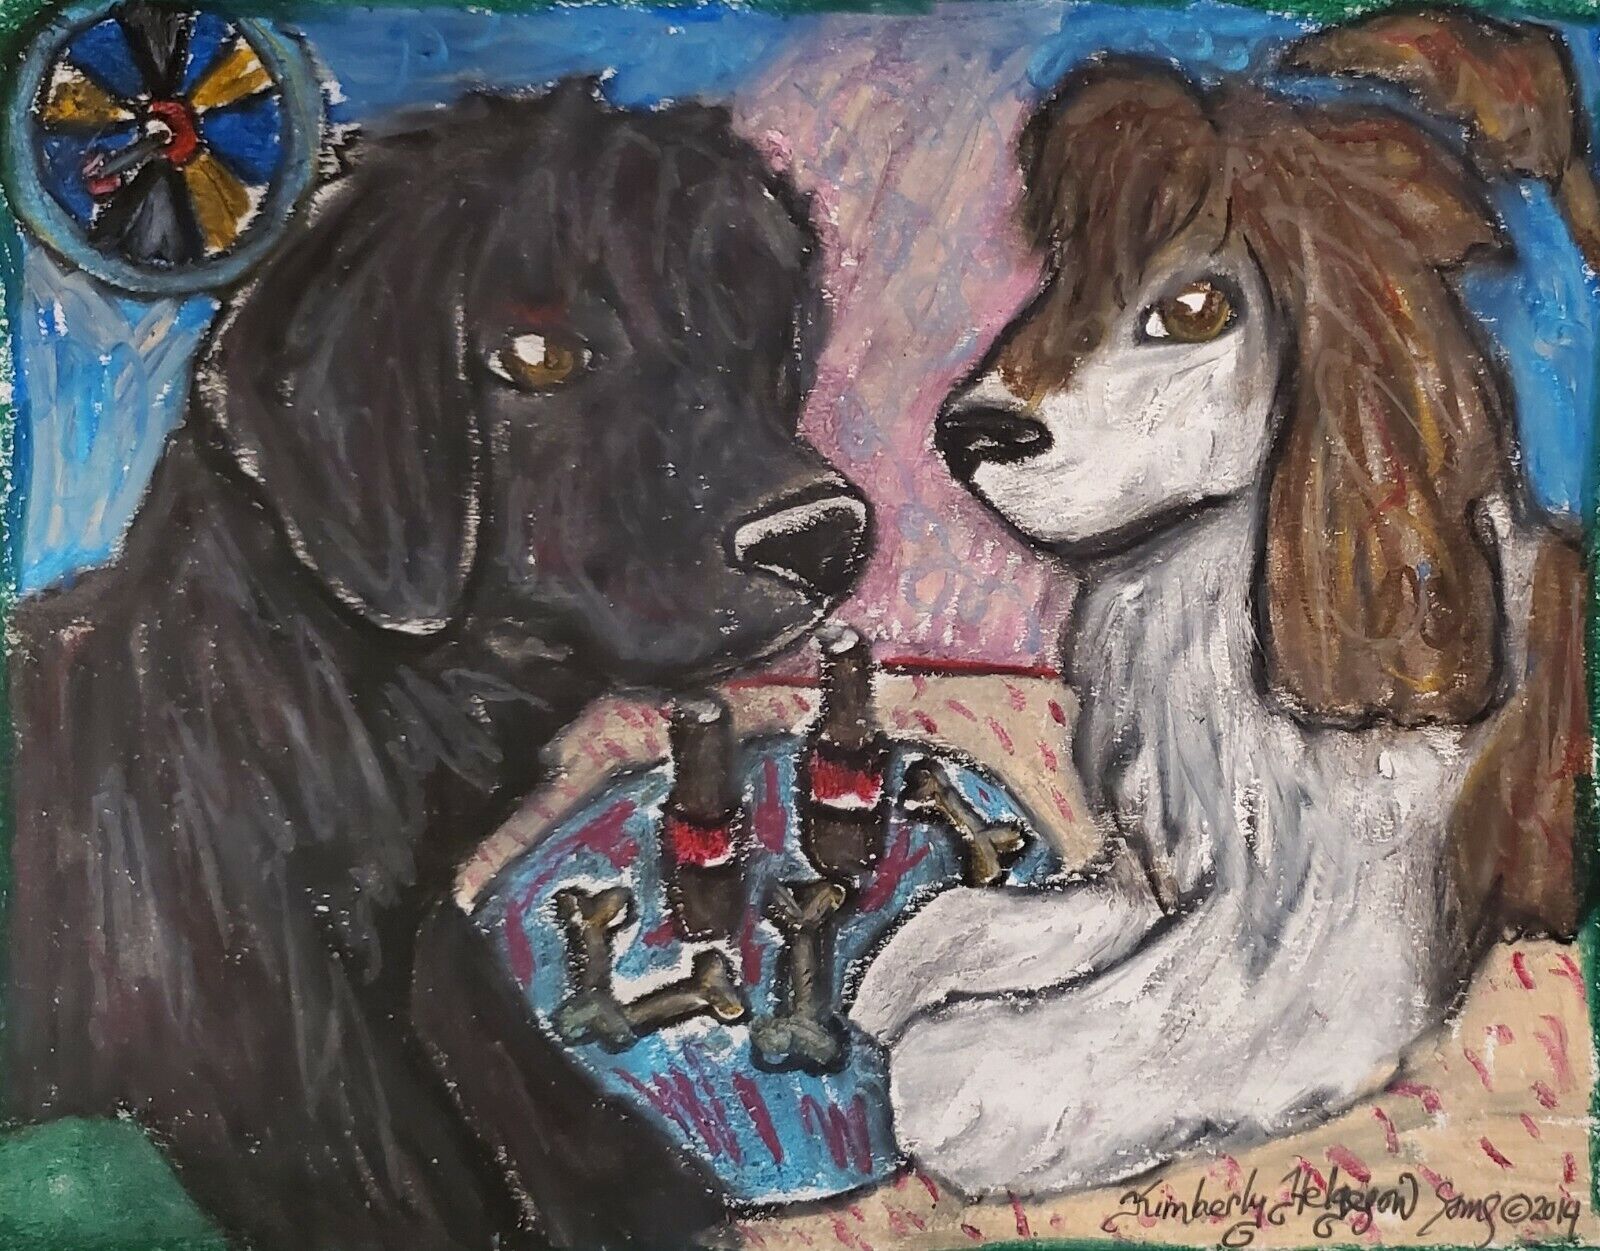 PORTUGUESE WATER DOG Date Night Art Print 13 x 19 Signed by Artist KSams PWD